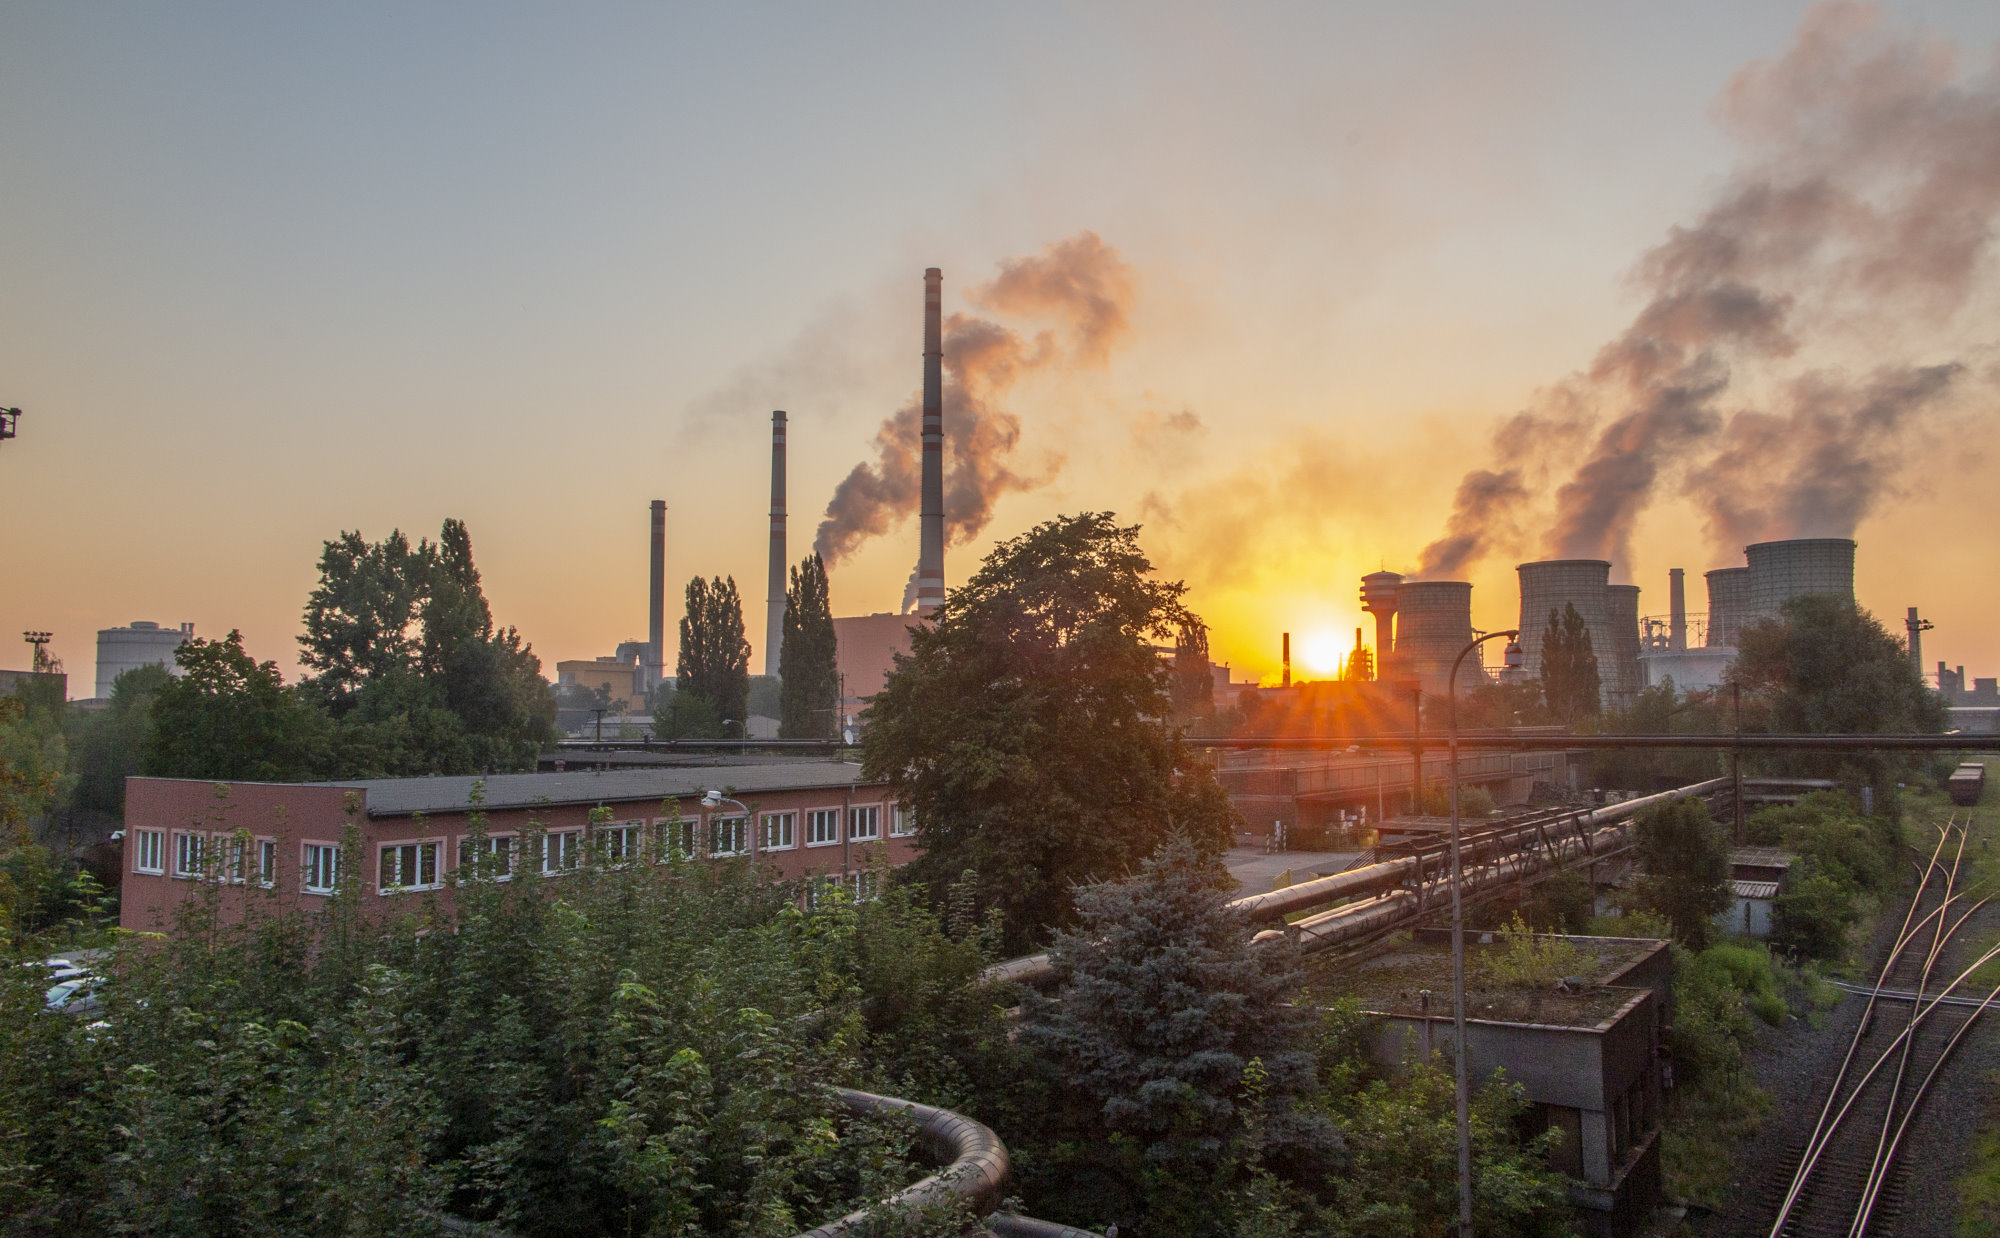 LIBERTY Ostrava has received 100 % of the proceeds from the sale of excess CO2 certificates